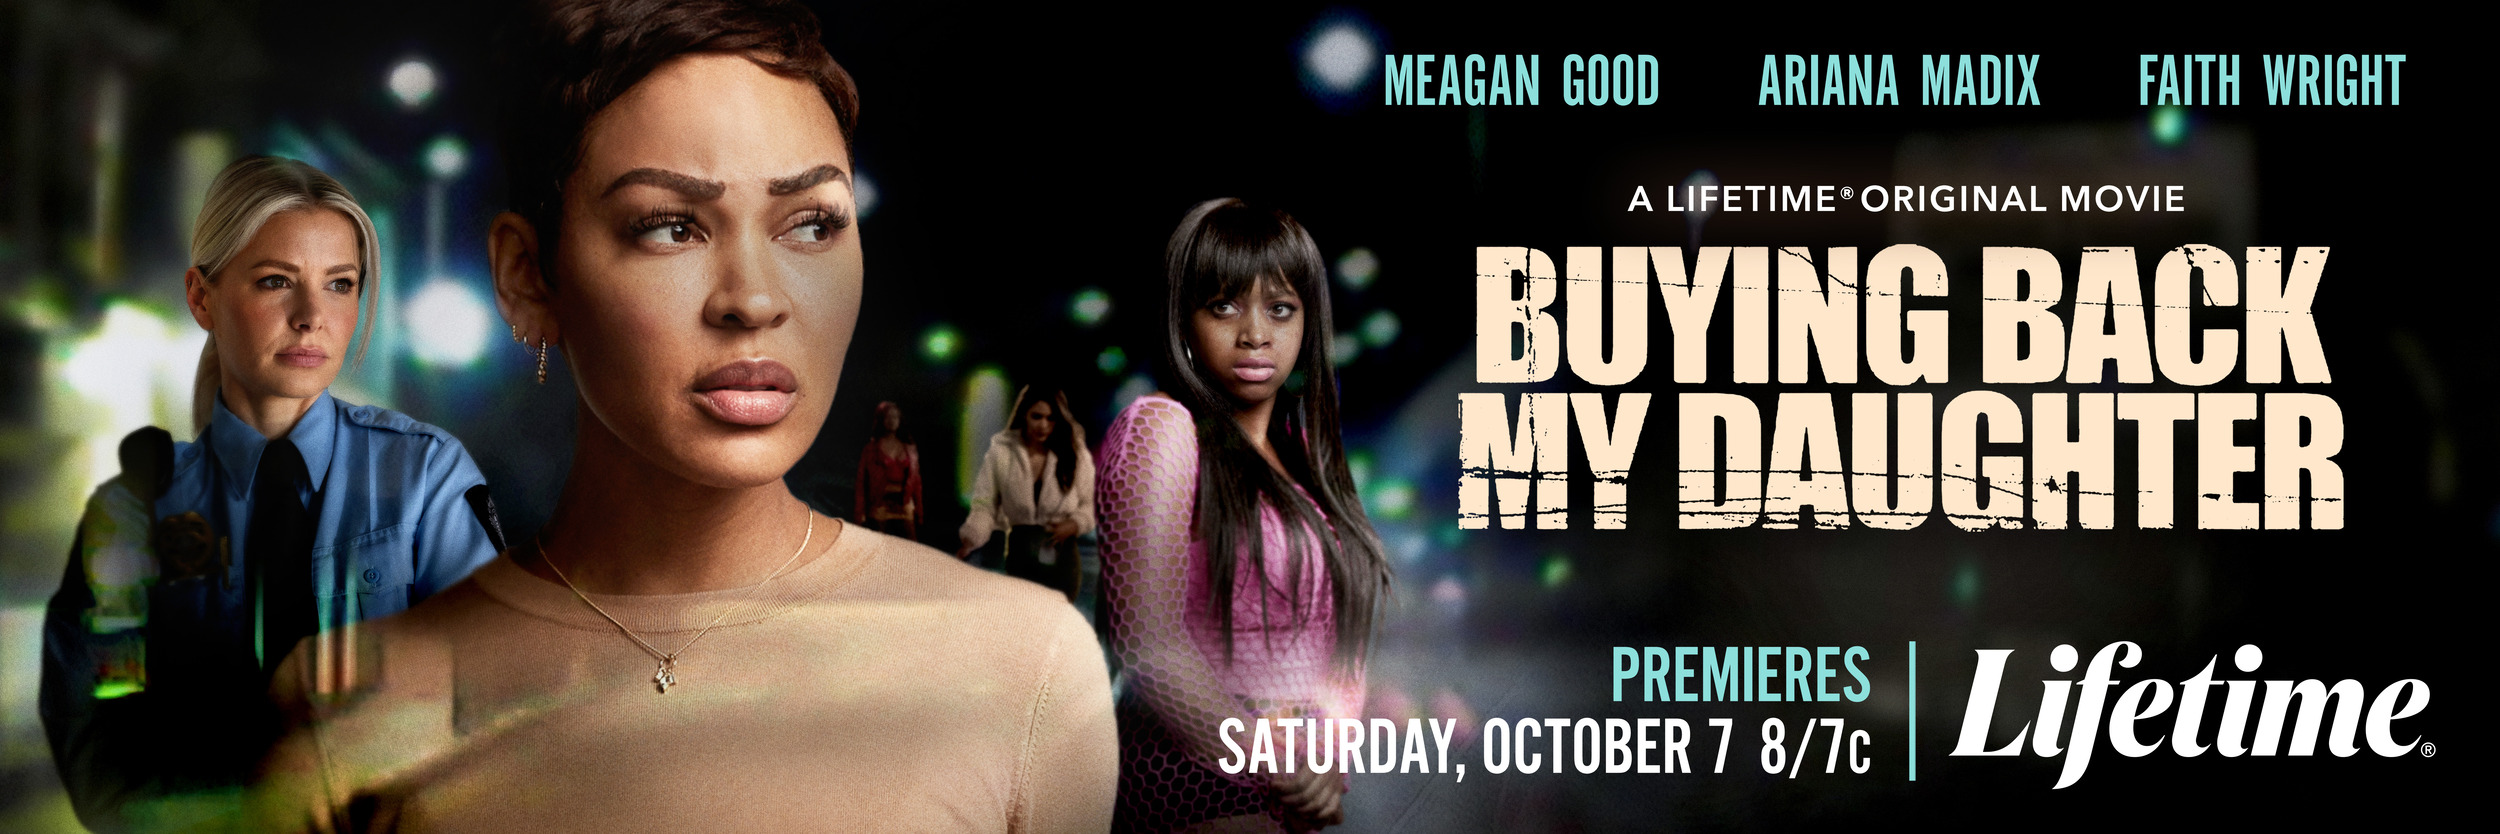 Mega Sized Movie Poster Image for Buying Back My Daughter (#2 of 2)